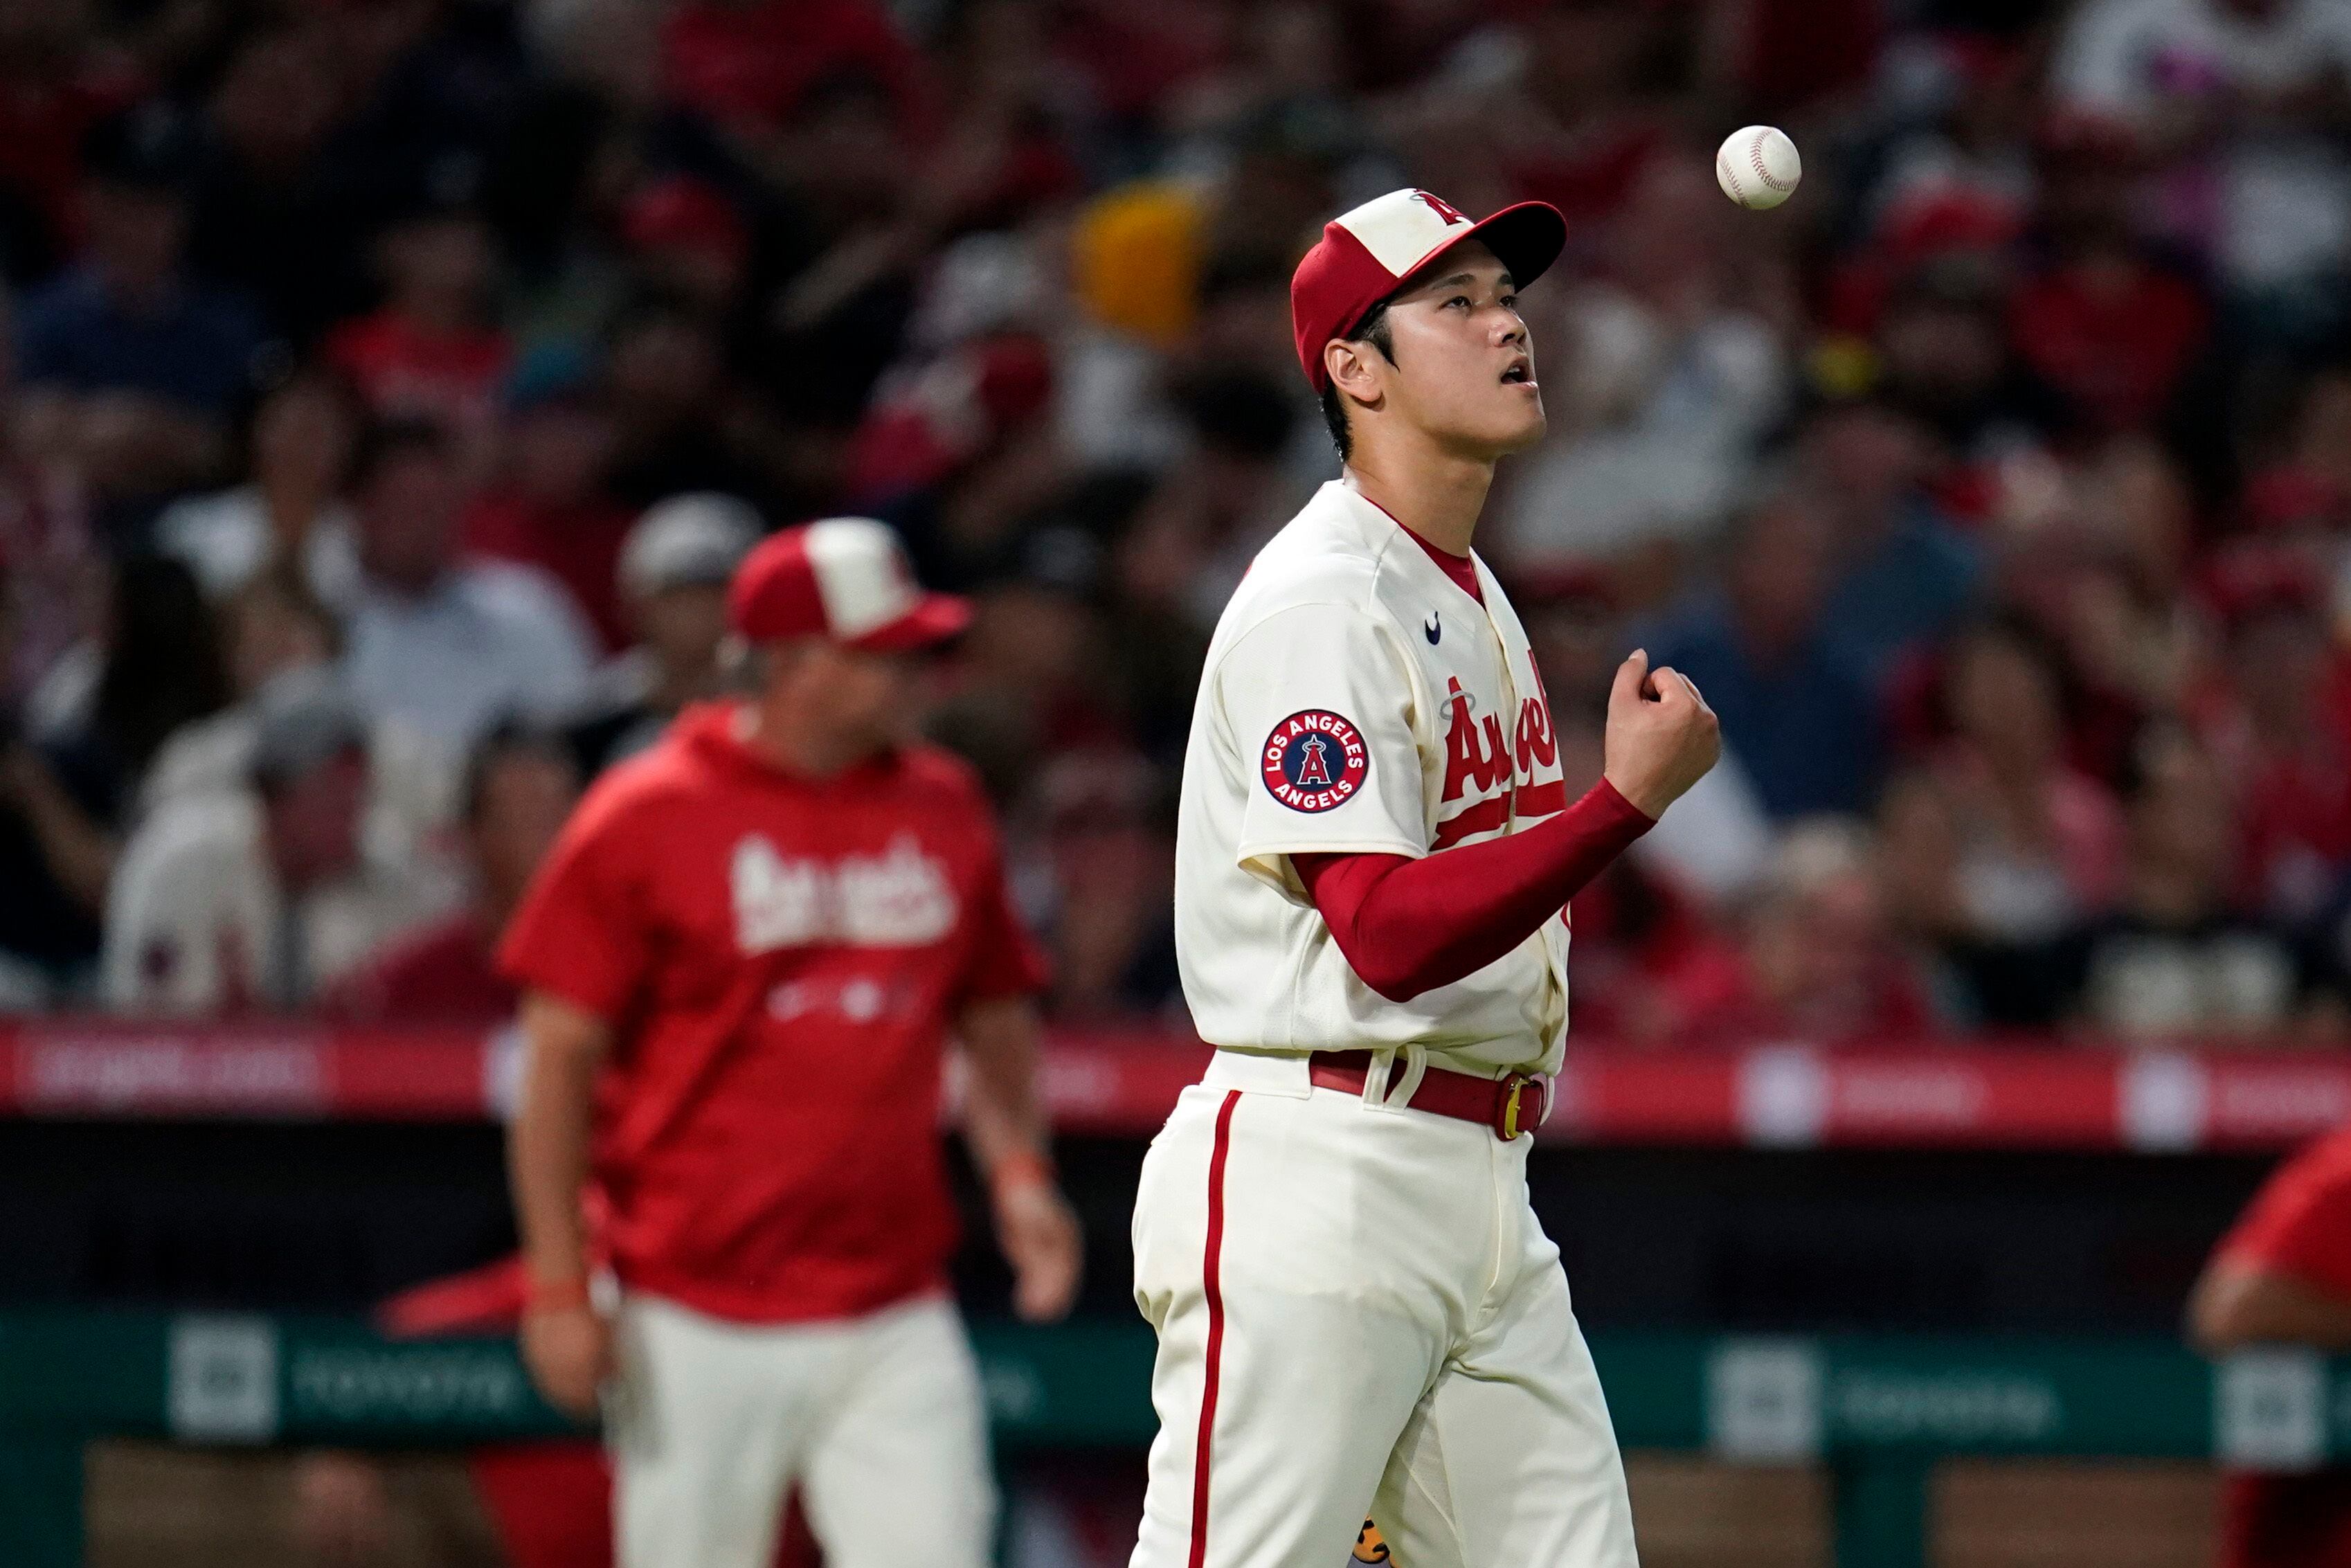 Will Shohei Ohtani accept that Angels can't be fixed, choose Giants?